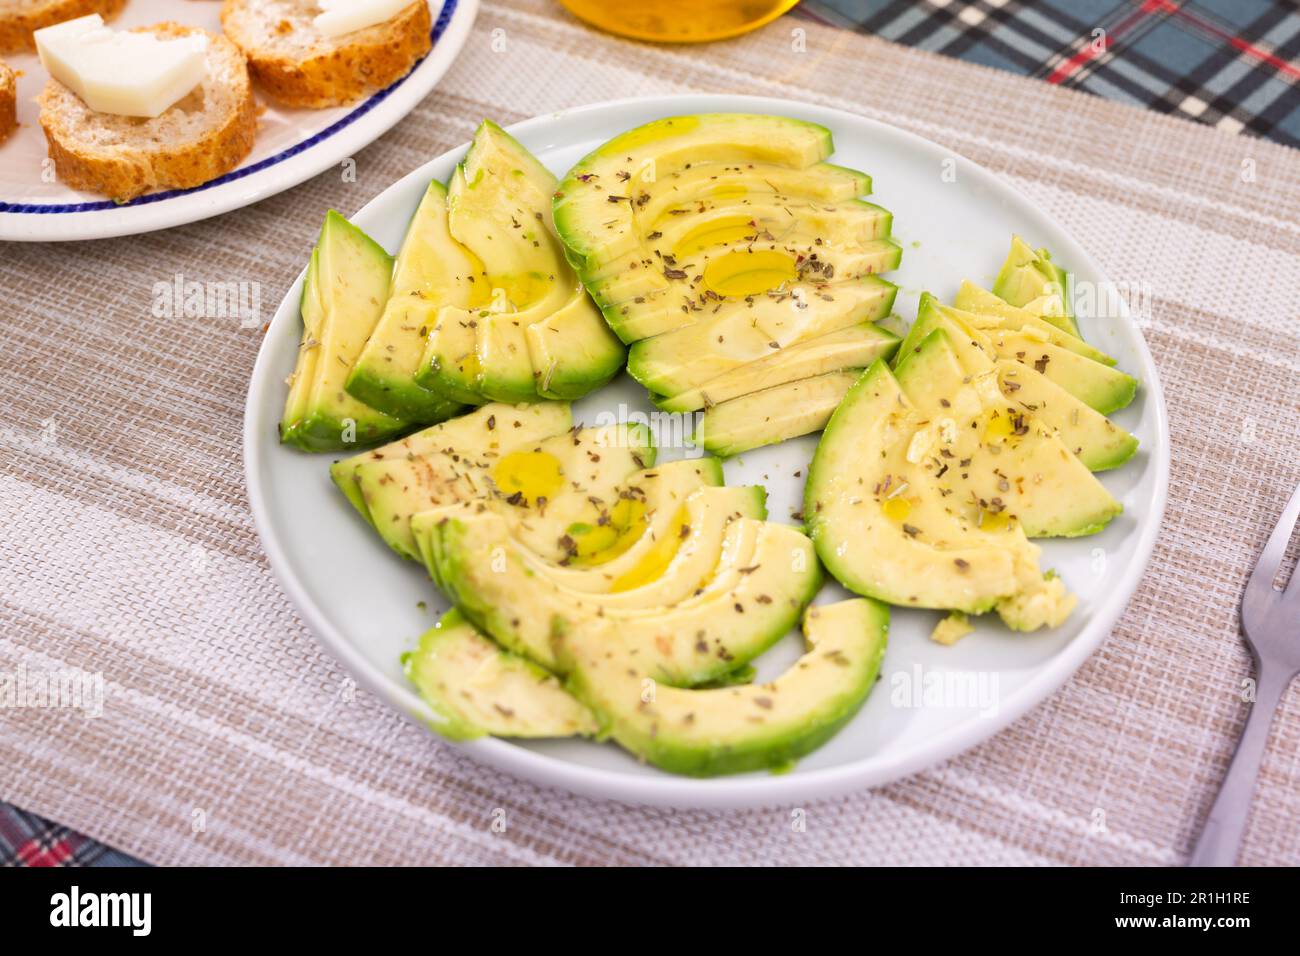 ripe avocado pulp cut into pieces sprinkled with lemon juice on a plate Stock Photo